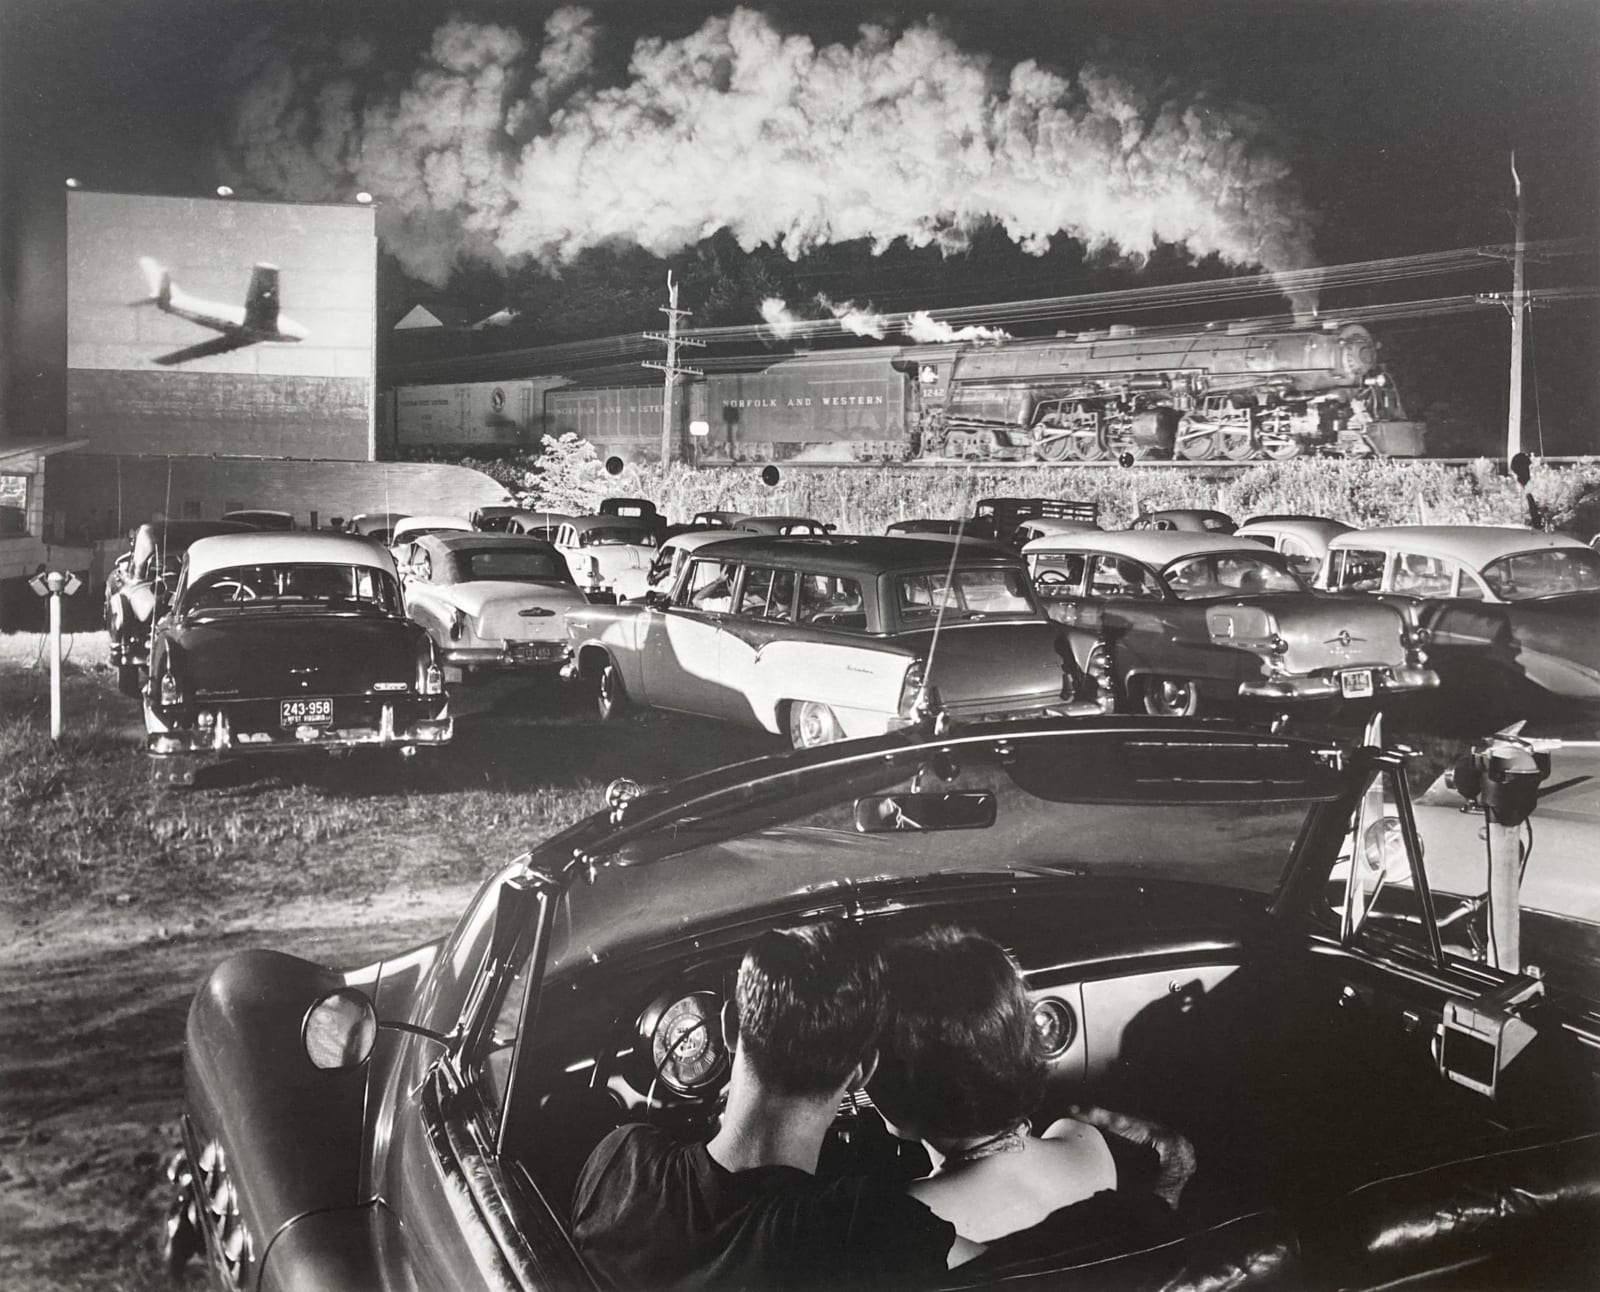 jacksonfineart-o.-winston-link-hot-shot-eastbound-at-the-drive-in-iaeger-west-virginia-1956.jpg